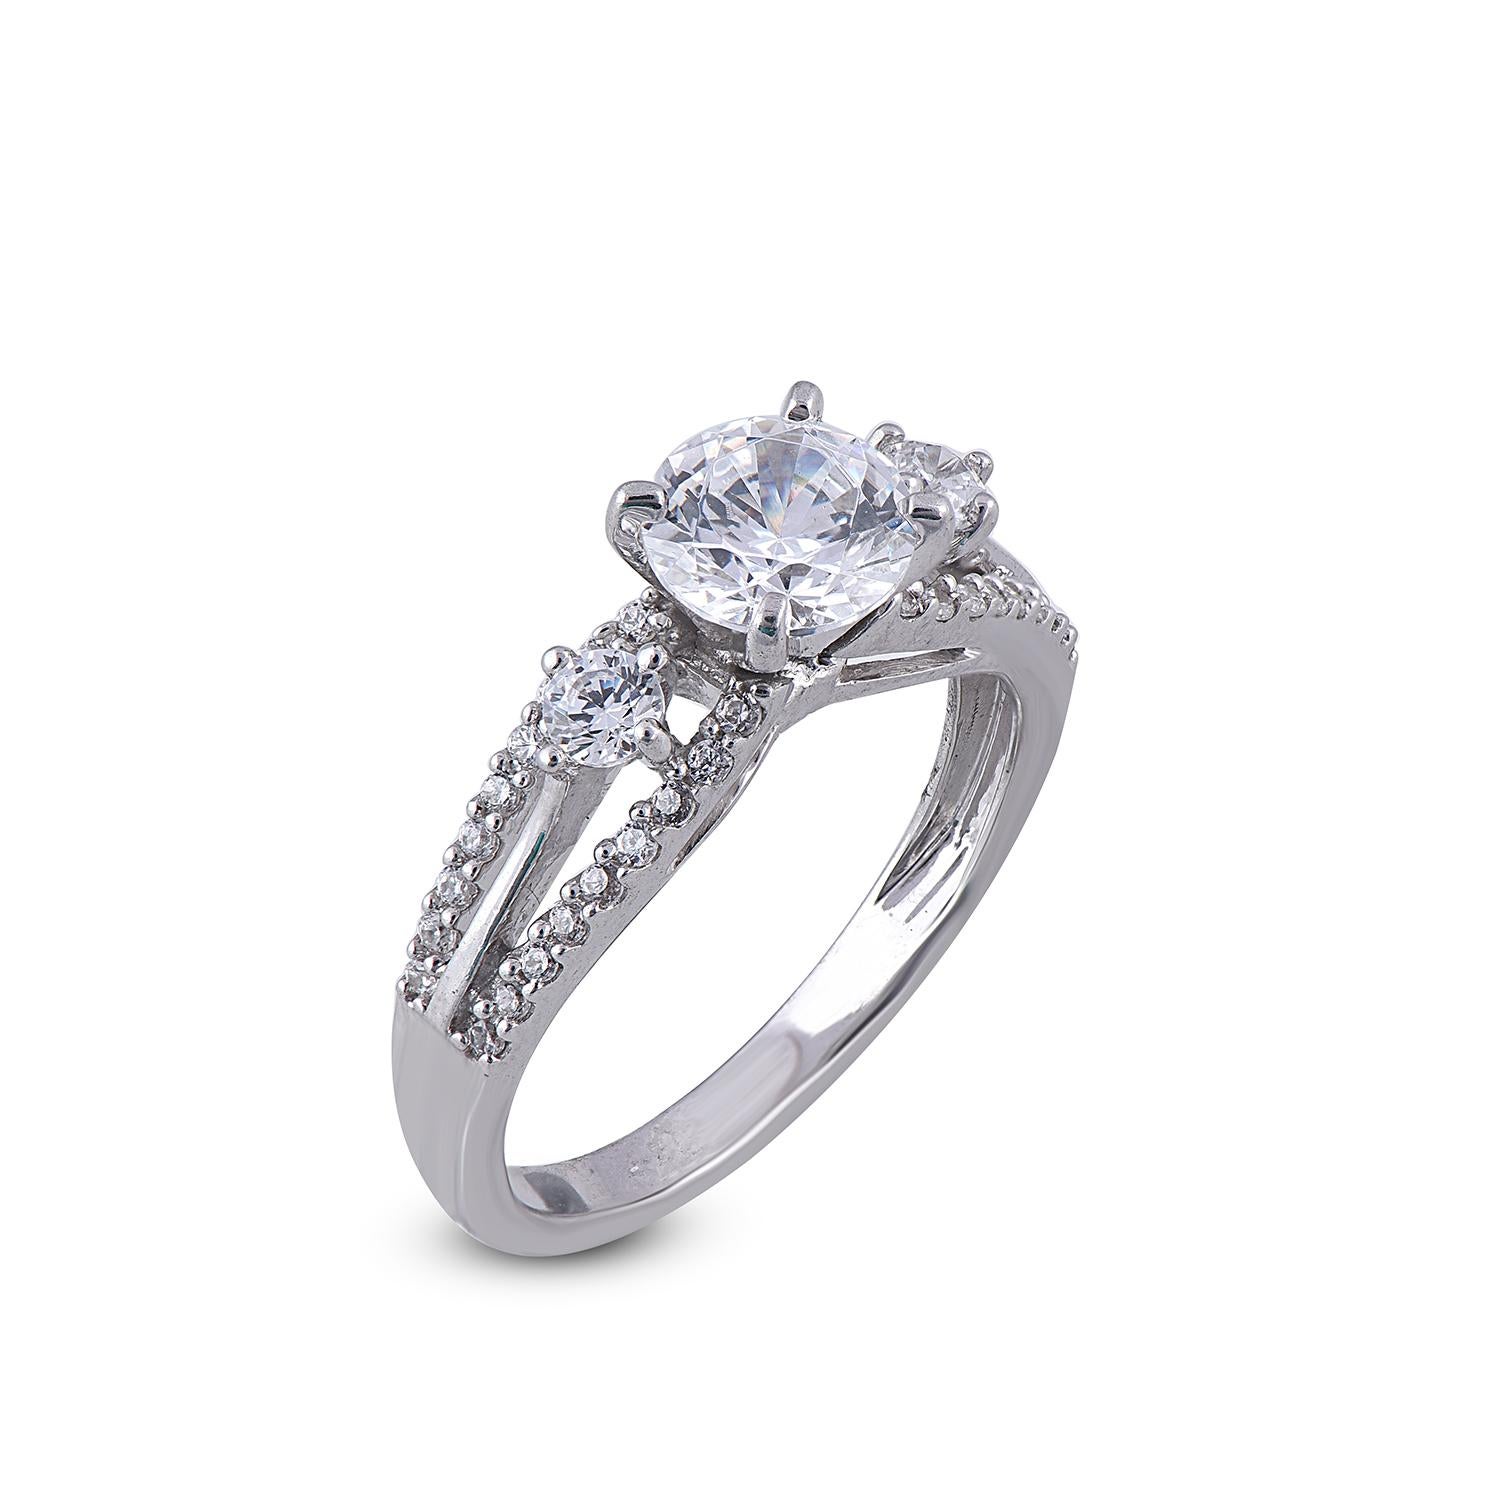 With one look of this Beautiful Round Split Shank Diamond Engagement Ring crafted in 18 Karat white gold. This ring is beautifully designed in 59 round diamond and studded with 1.00 ct centre stone and 0.33 ct diamonds on shank in prong and bezel